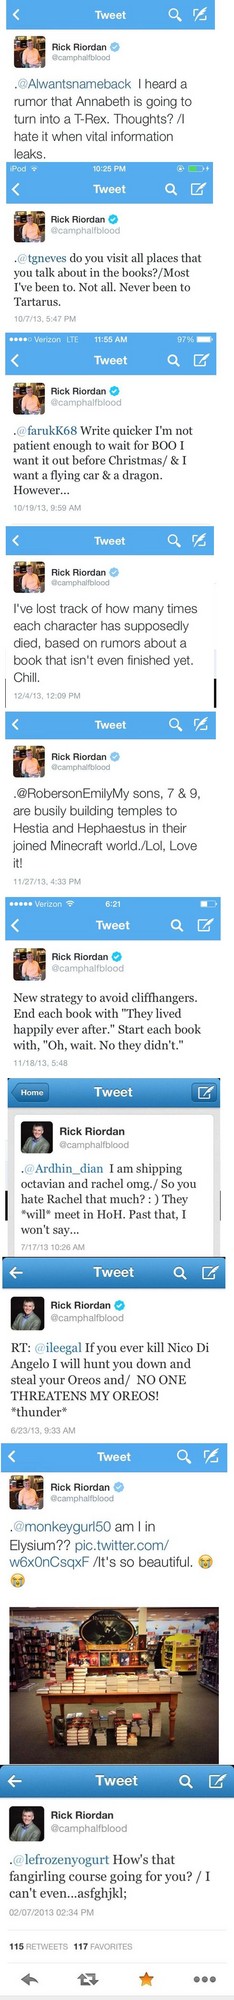  Tweets from Rick